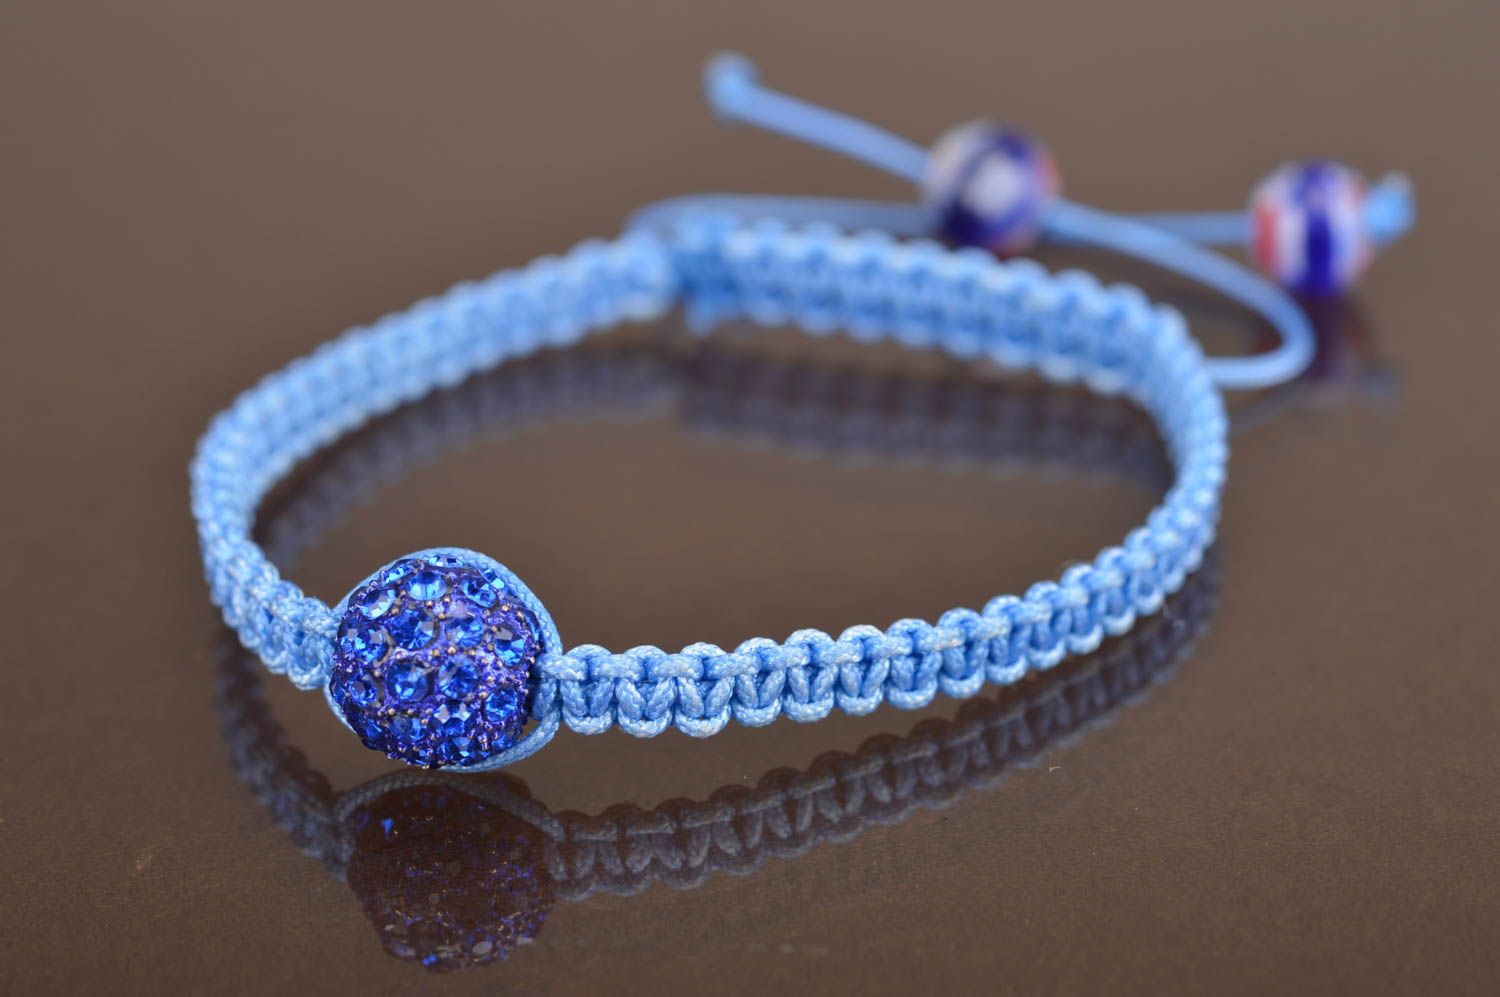 Blue woven adjustable unusual cute wrist bracelet made of laces with bead photo 2